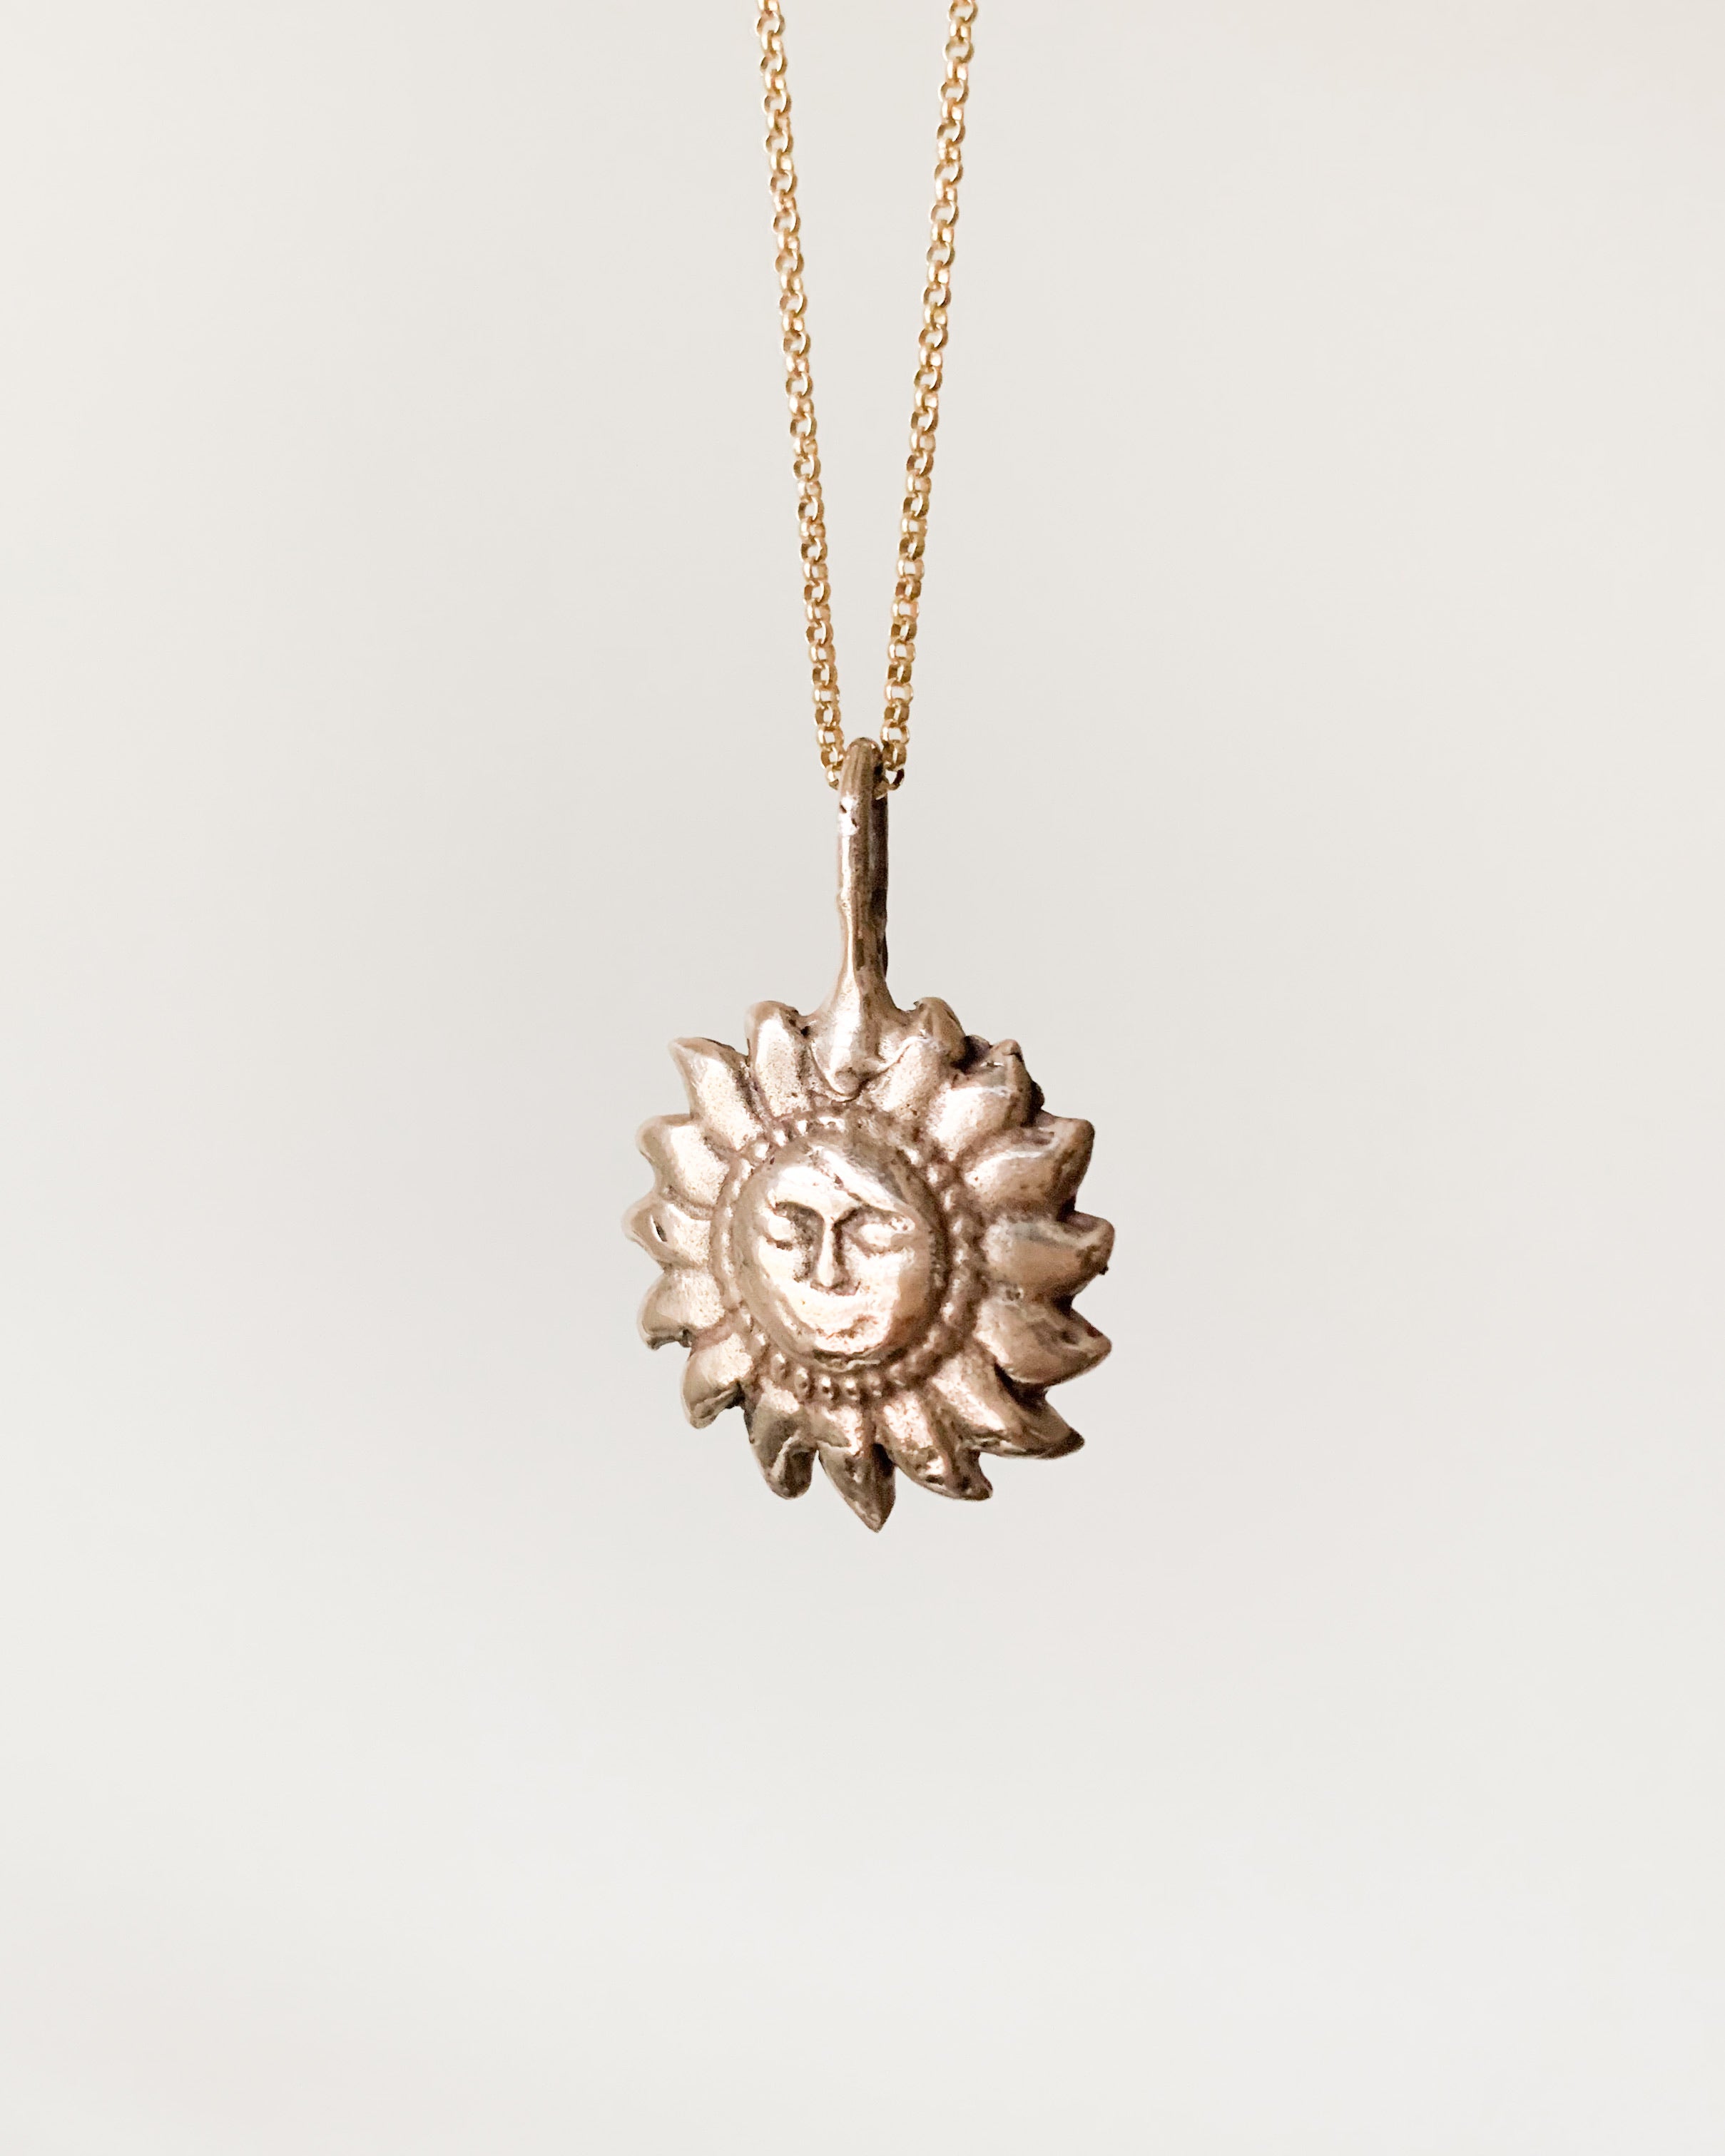 a bronze sun shaped pendant on a gold chain, shown on a white background